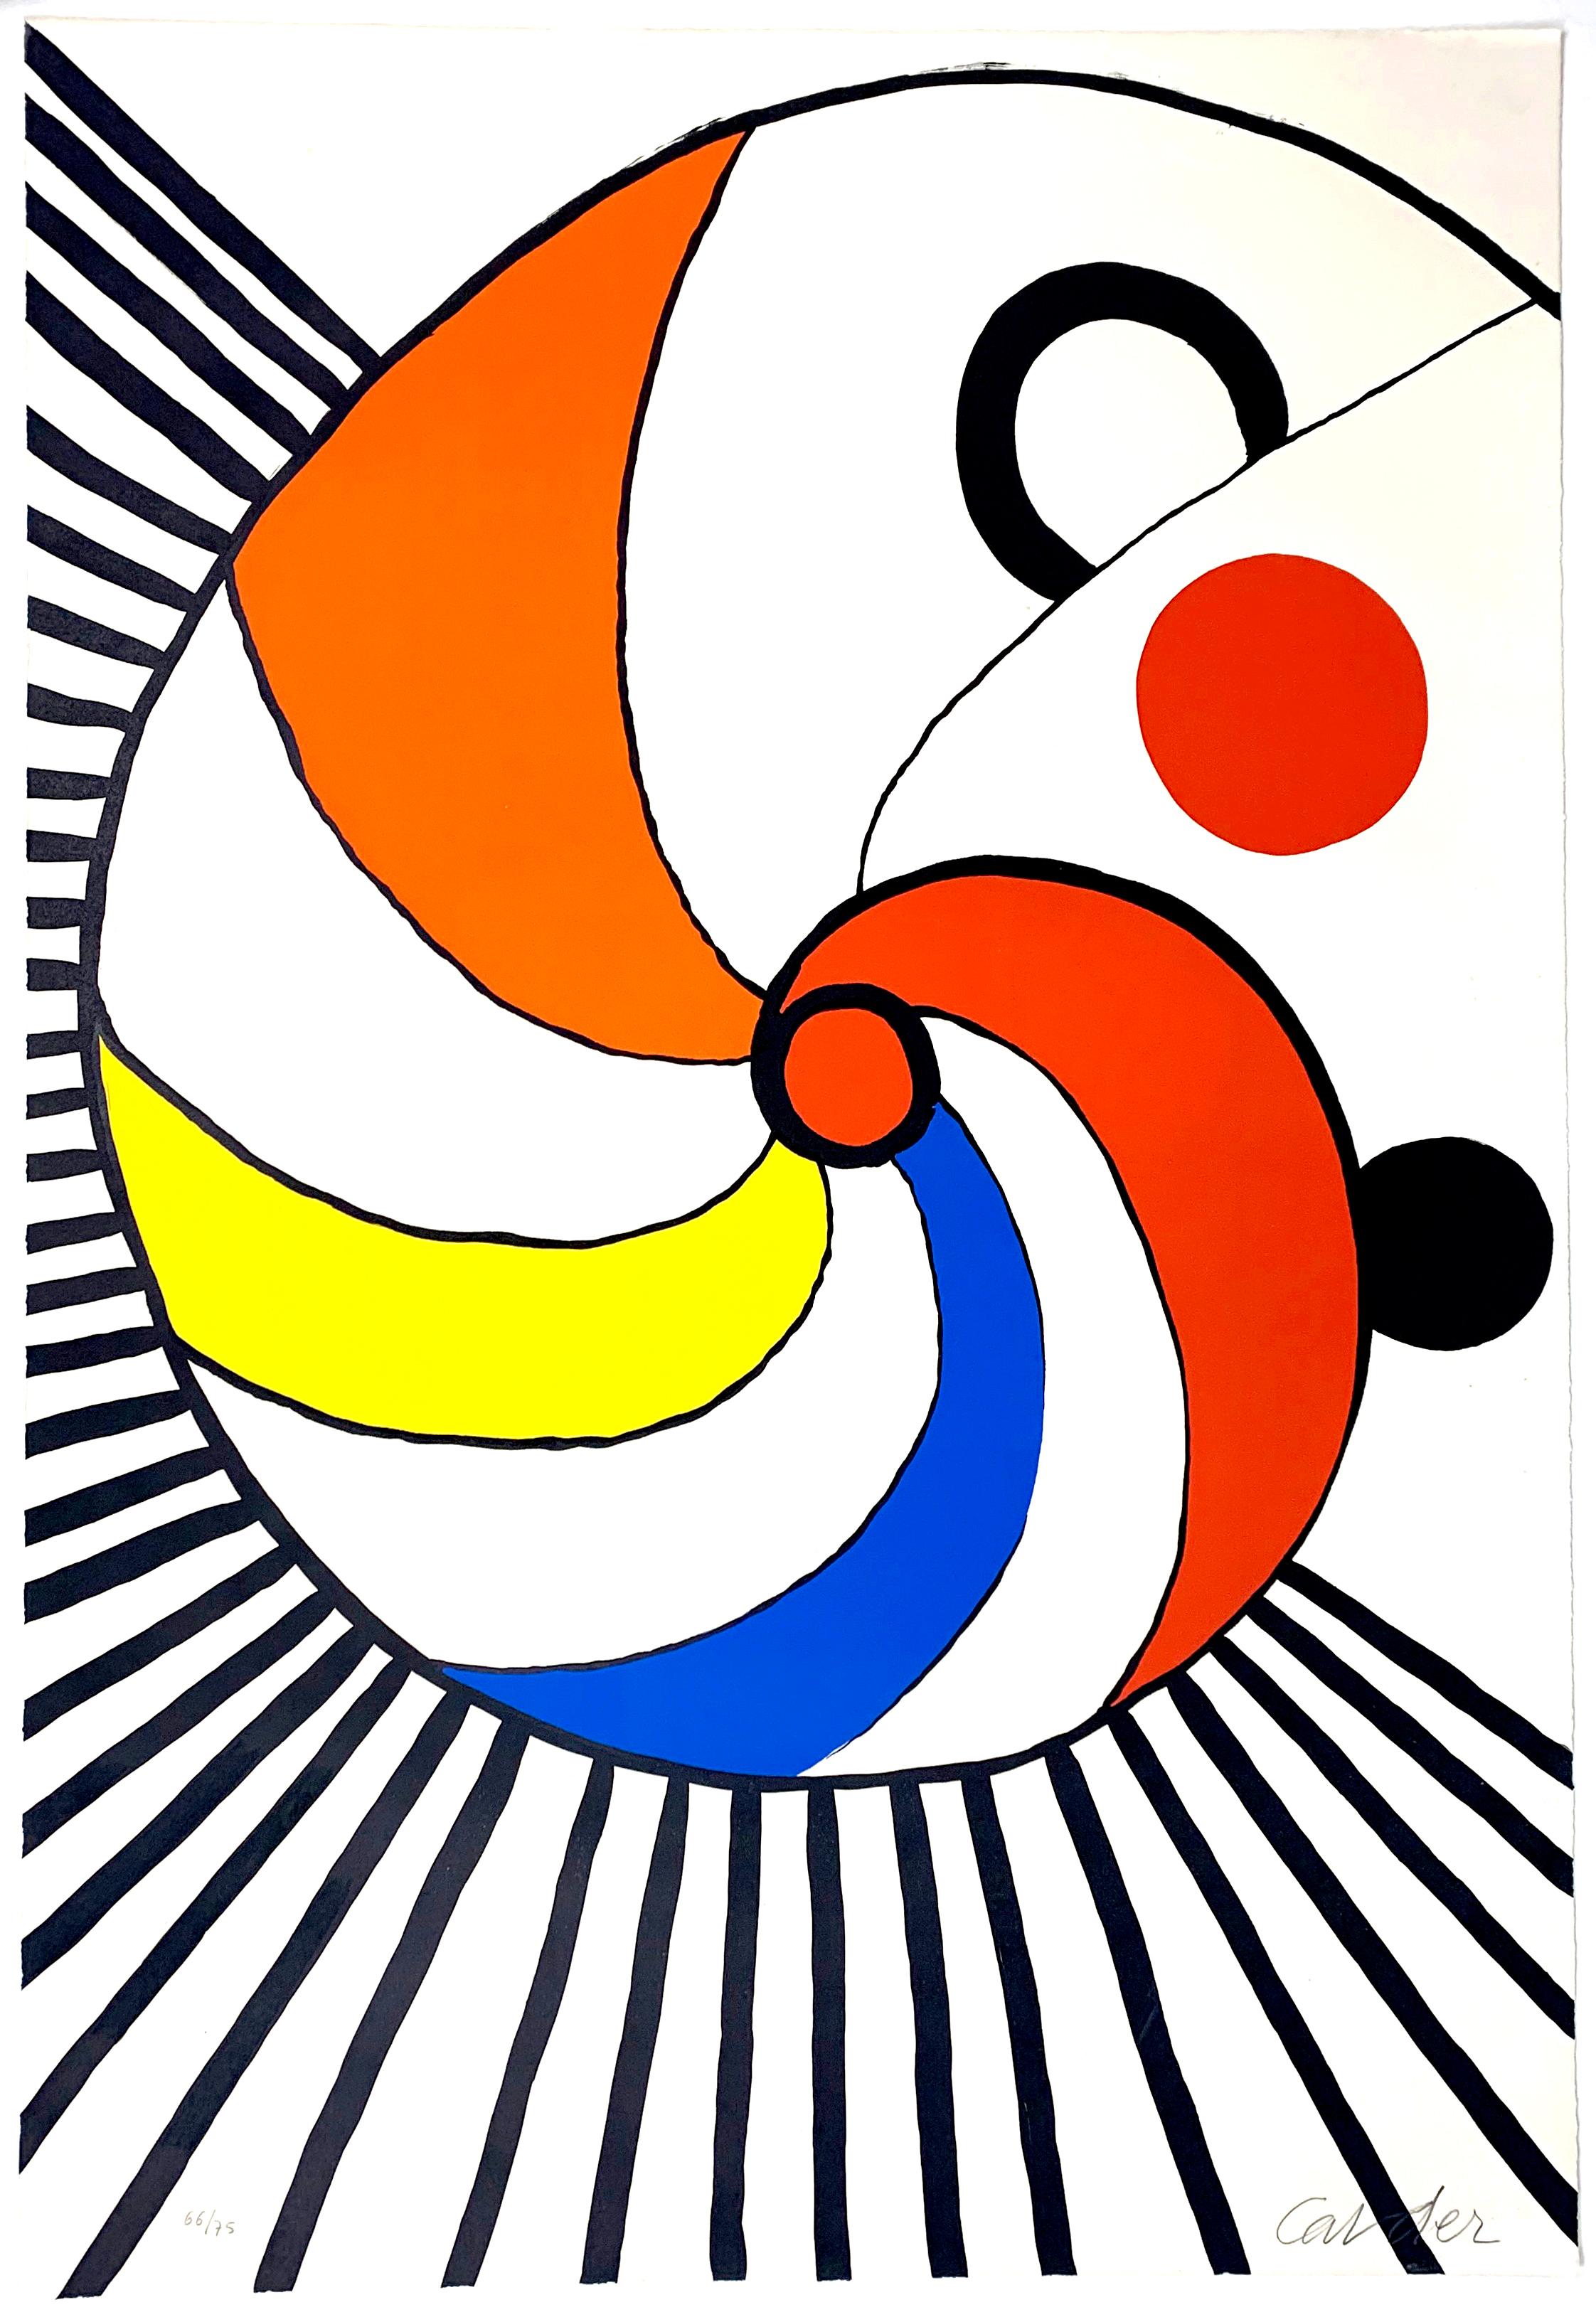 Artist: Alexander Calder
Title: Untitled, Spirale Multicolore
Date: 1975
Lithograph in colors on wove paper
Dimensions: 43 x 30 inches
Signed and numbered 66/75 in pencil 

